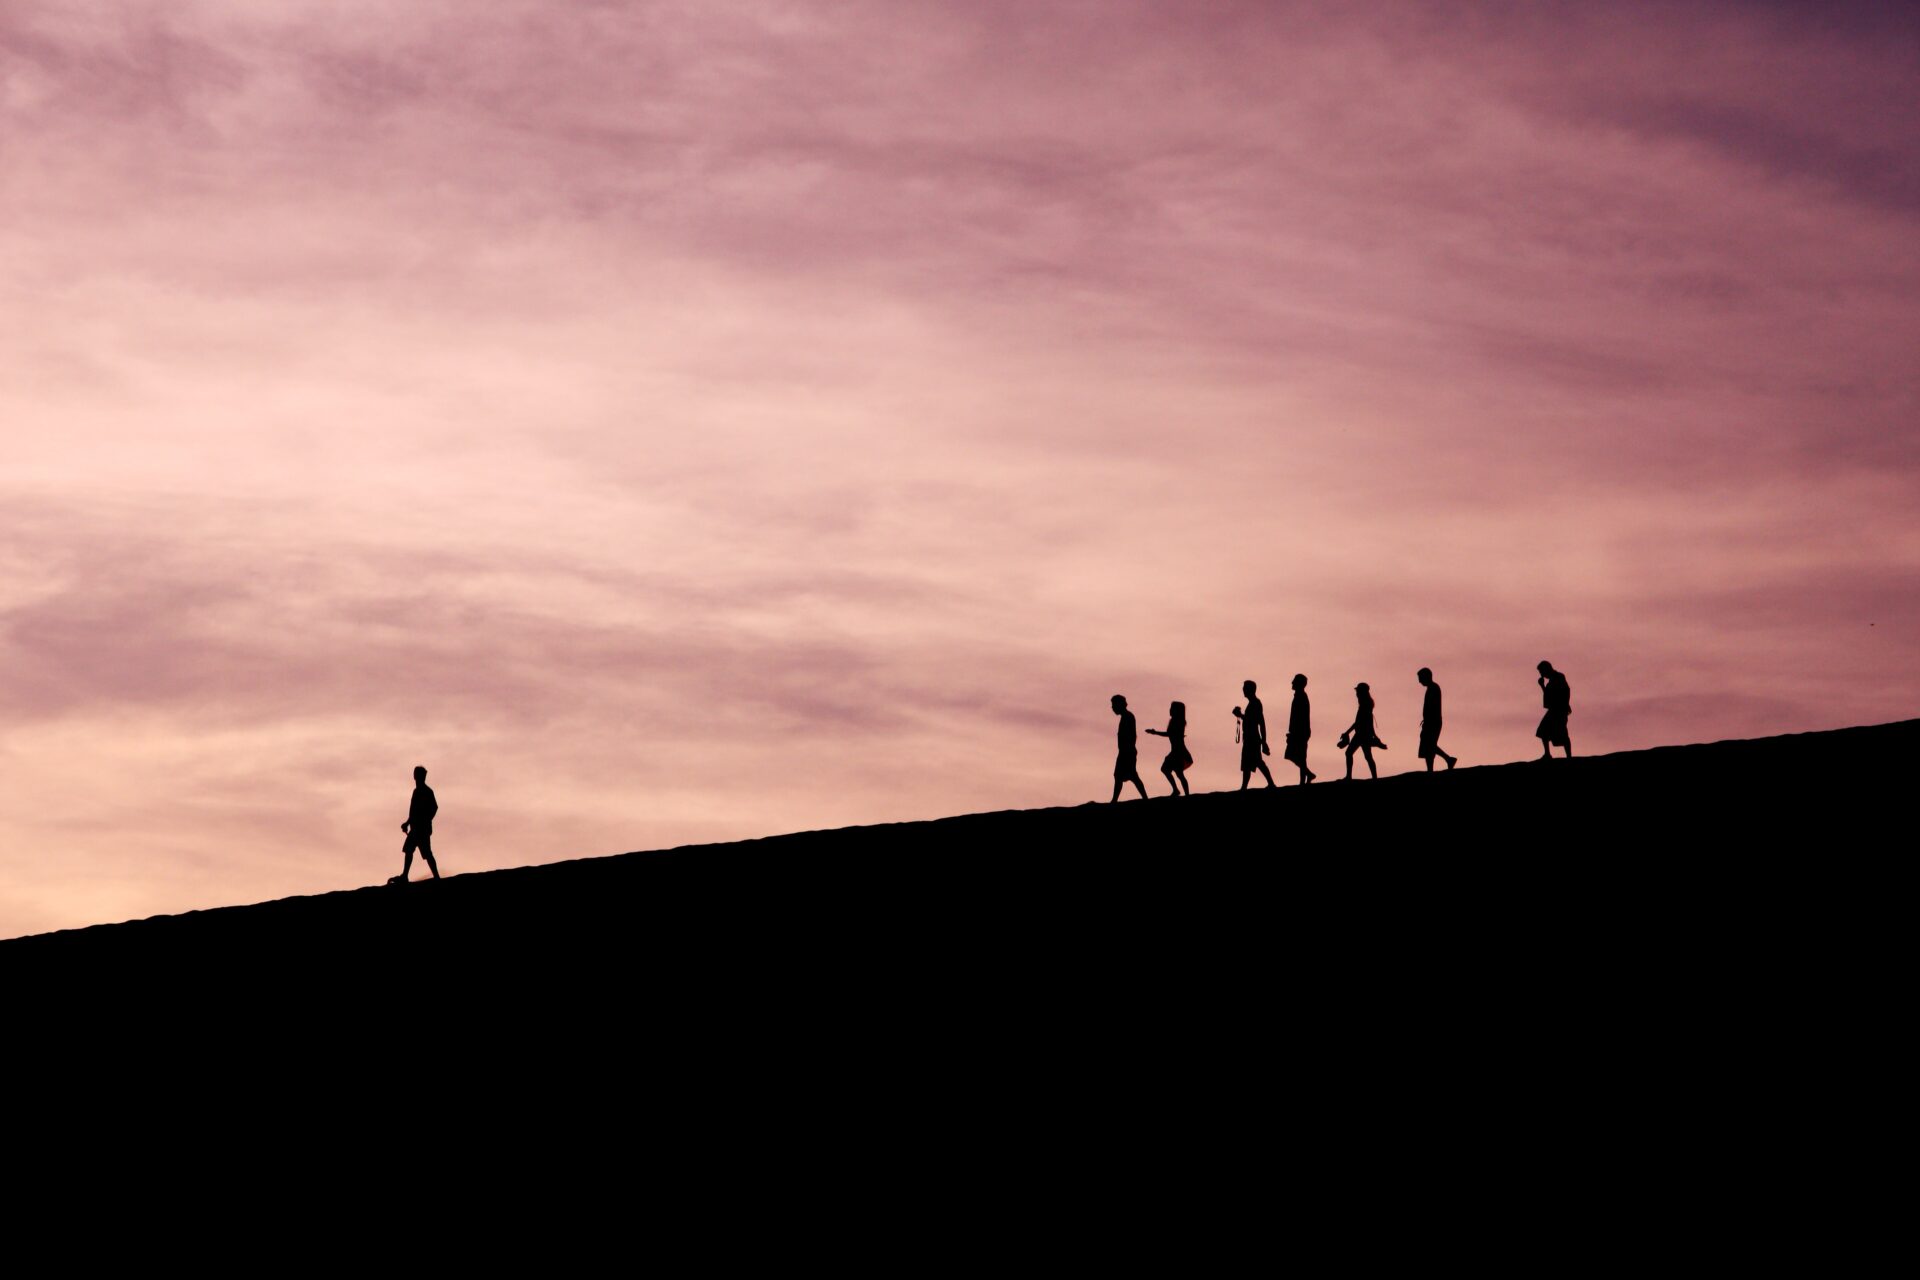 Silhouettes of seven people walking in a line downhill, following a single lead person.